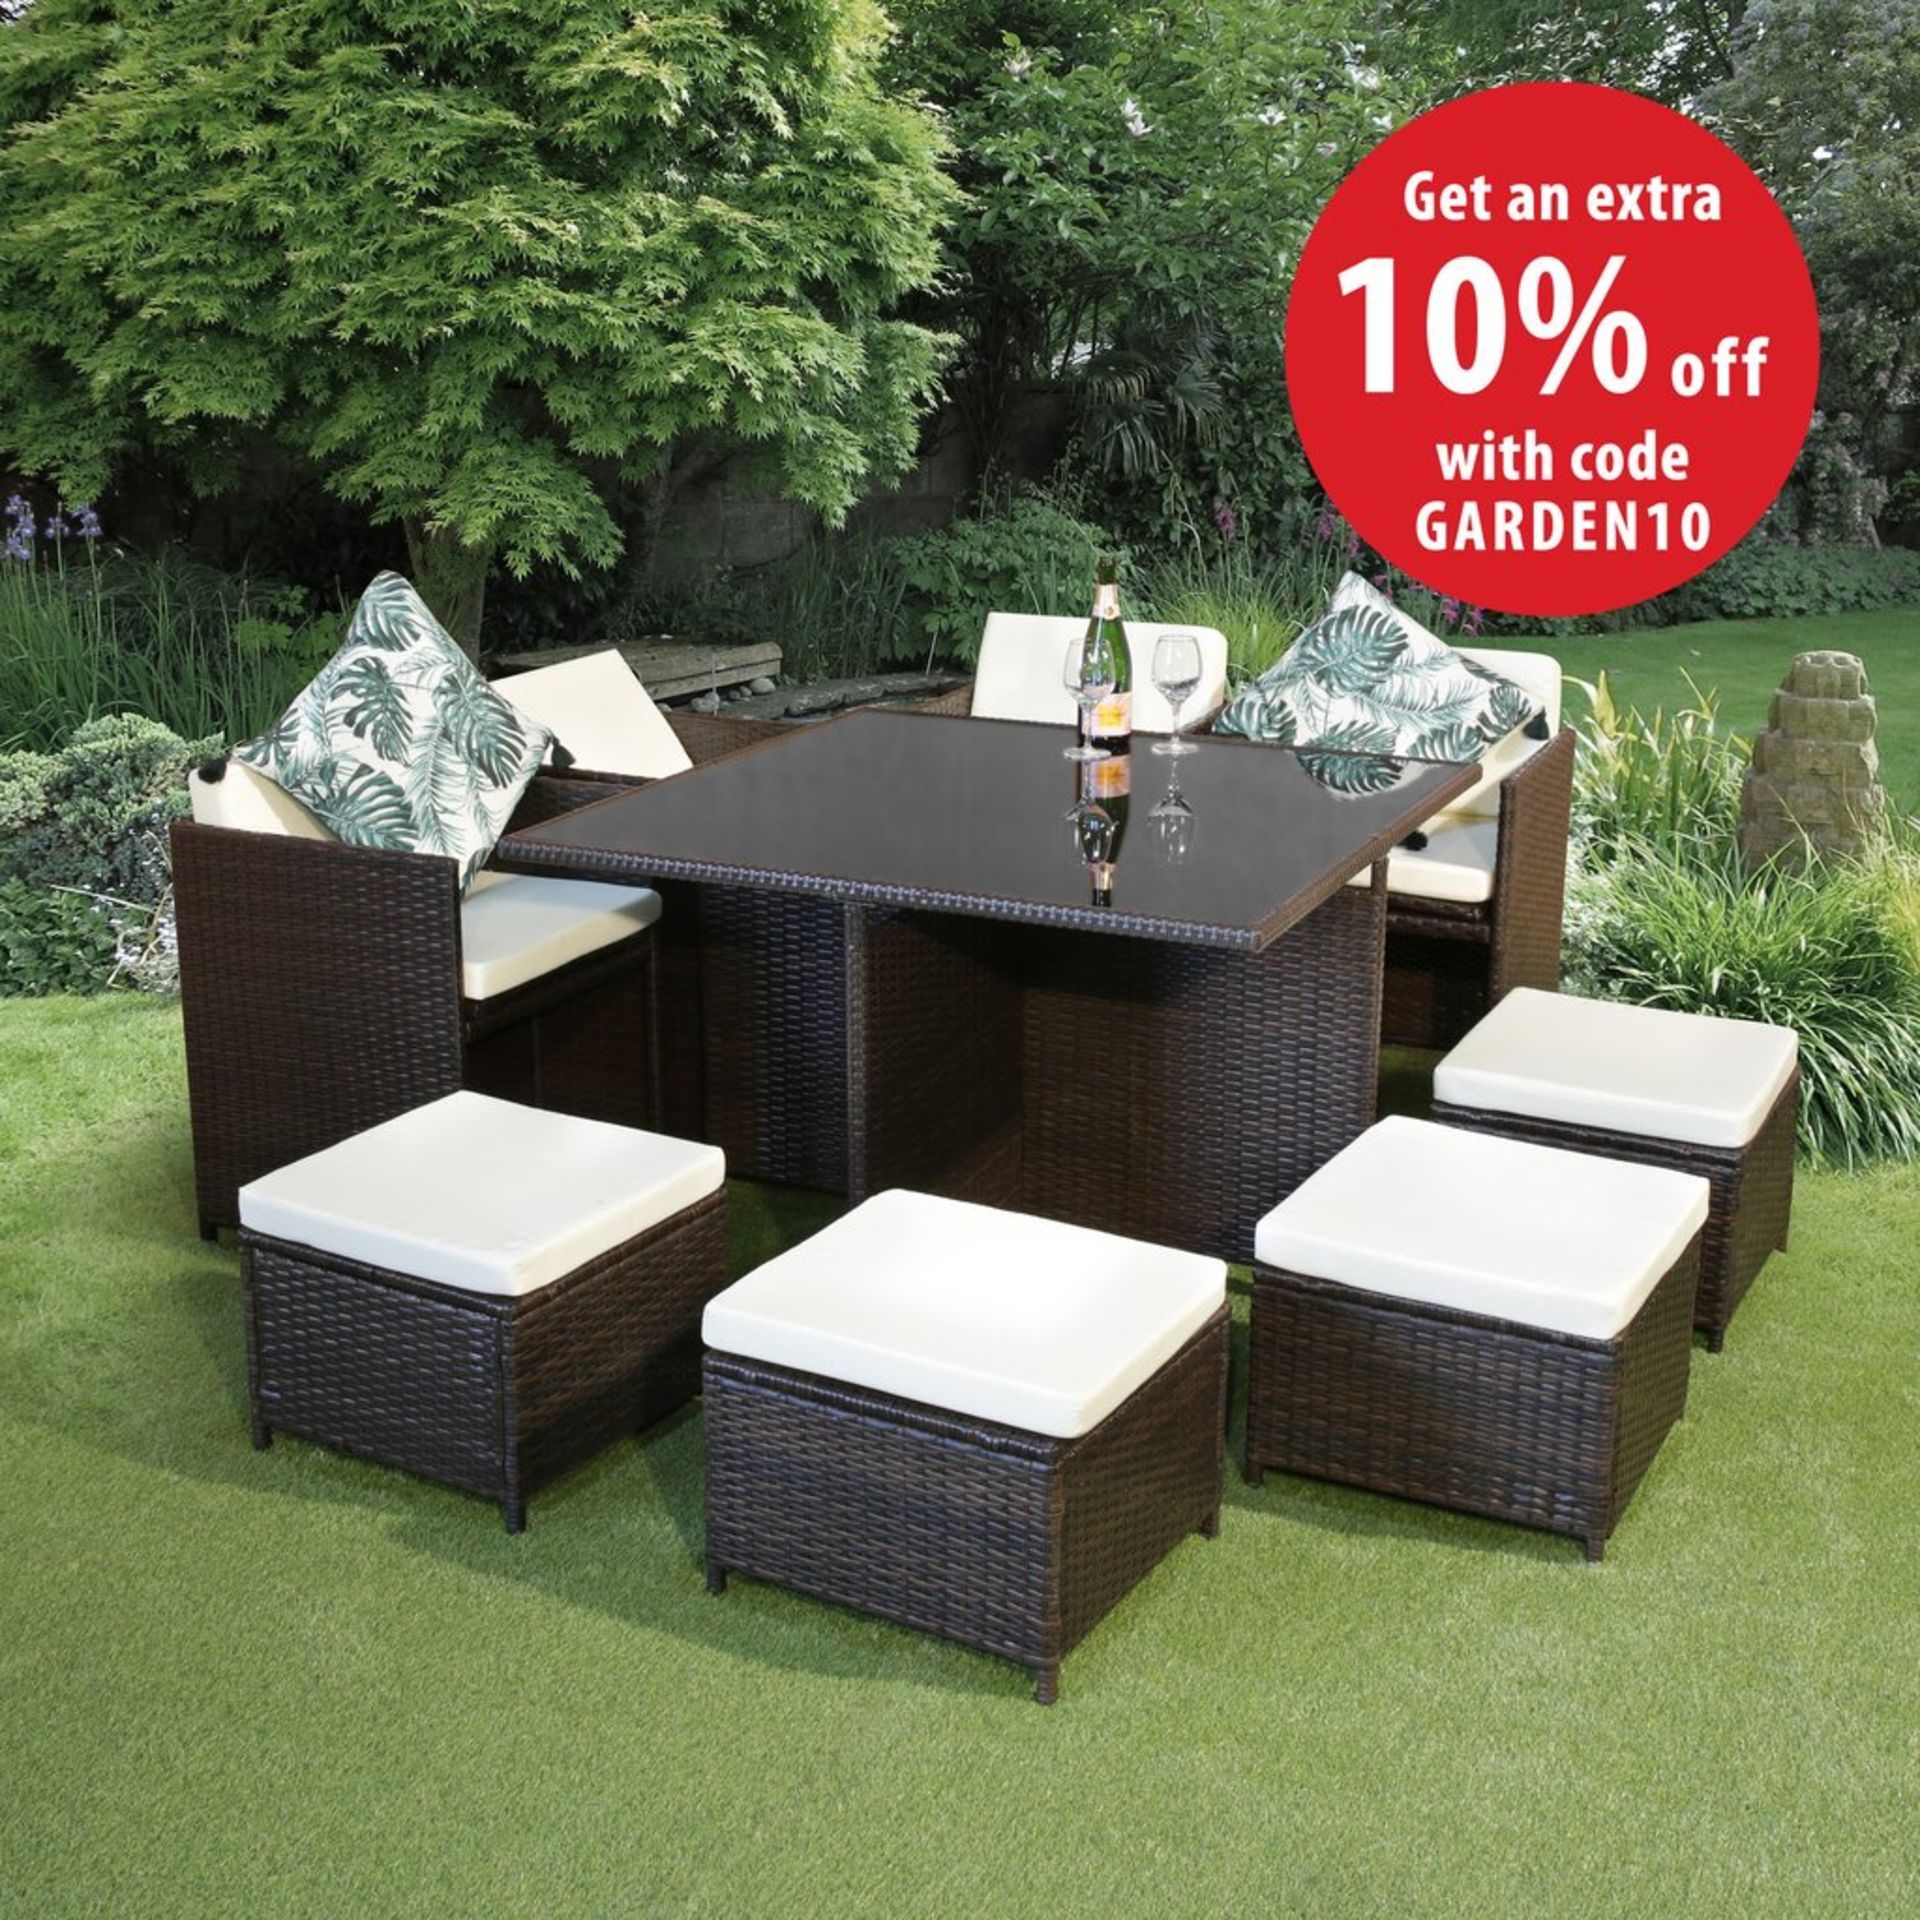 NEW BOXED - LUXE Roxanne 9 Piece Rattan Cube Set.  Modern and practical, the Roxanne cube set can